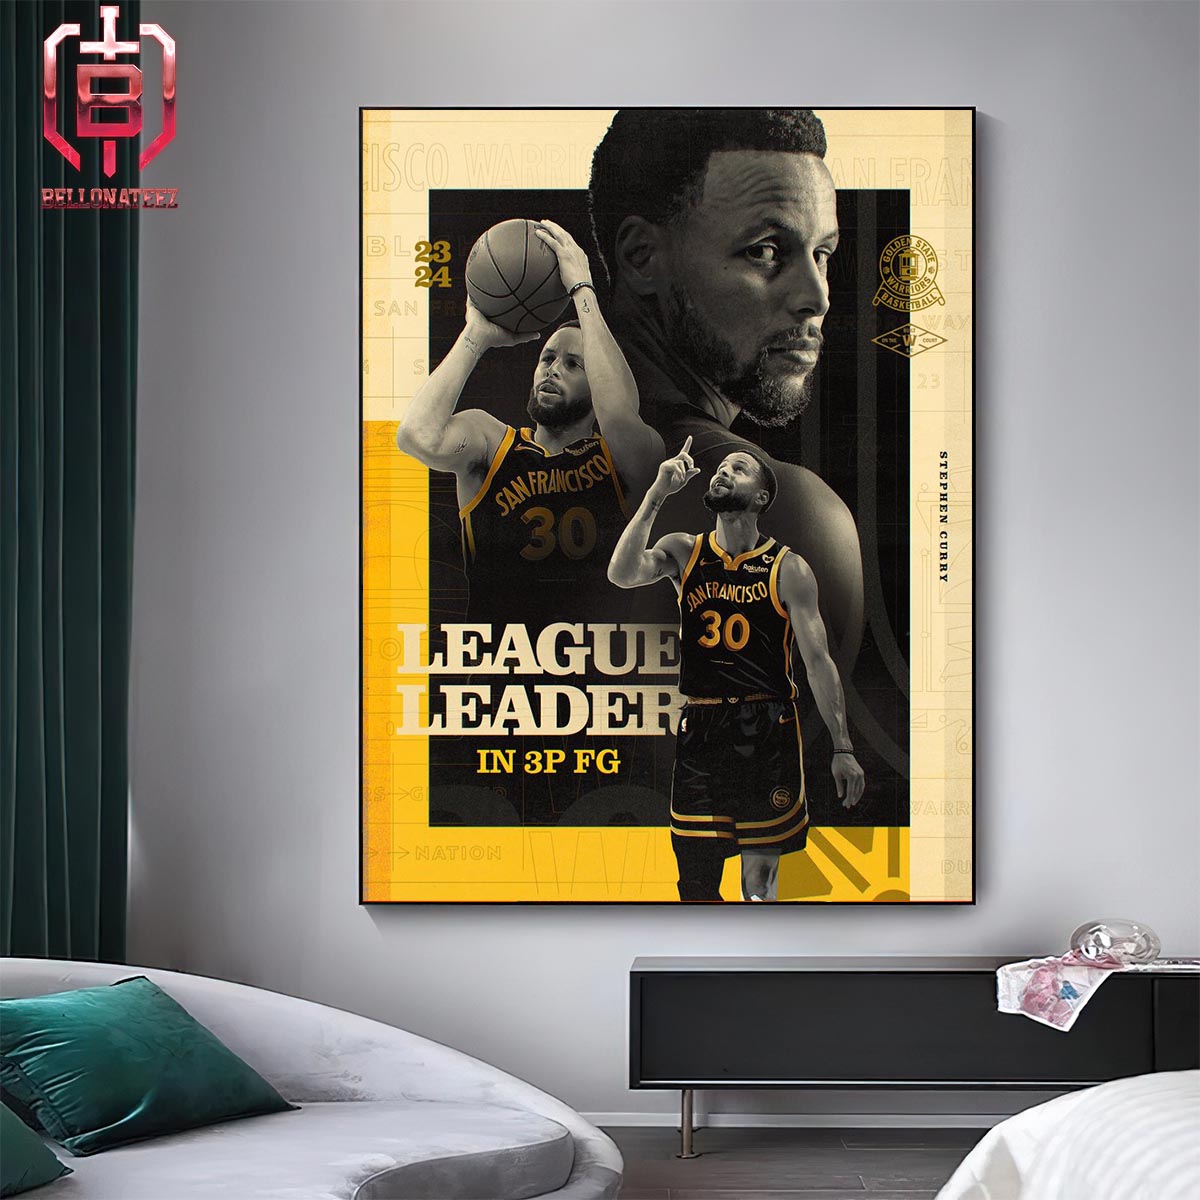 Stephen Curry Is League Leader In 3P FG With 357 Regular Season Threes Made Home Decor Poster Canvas